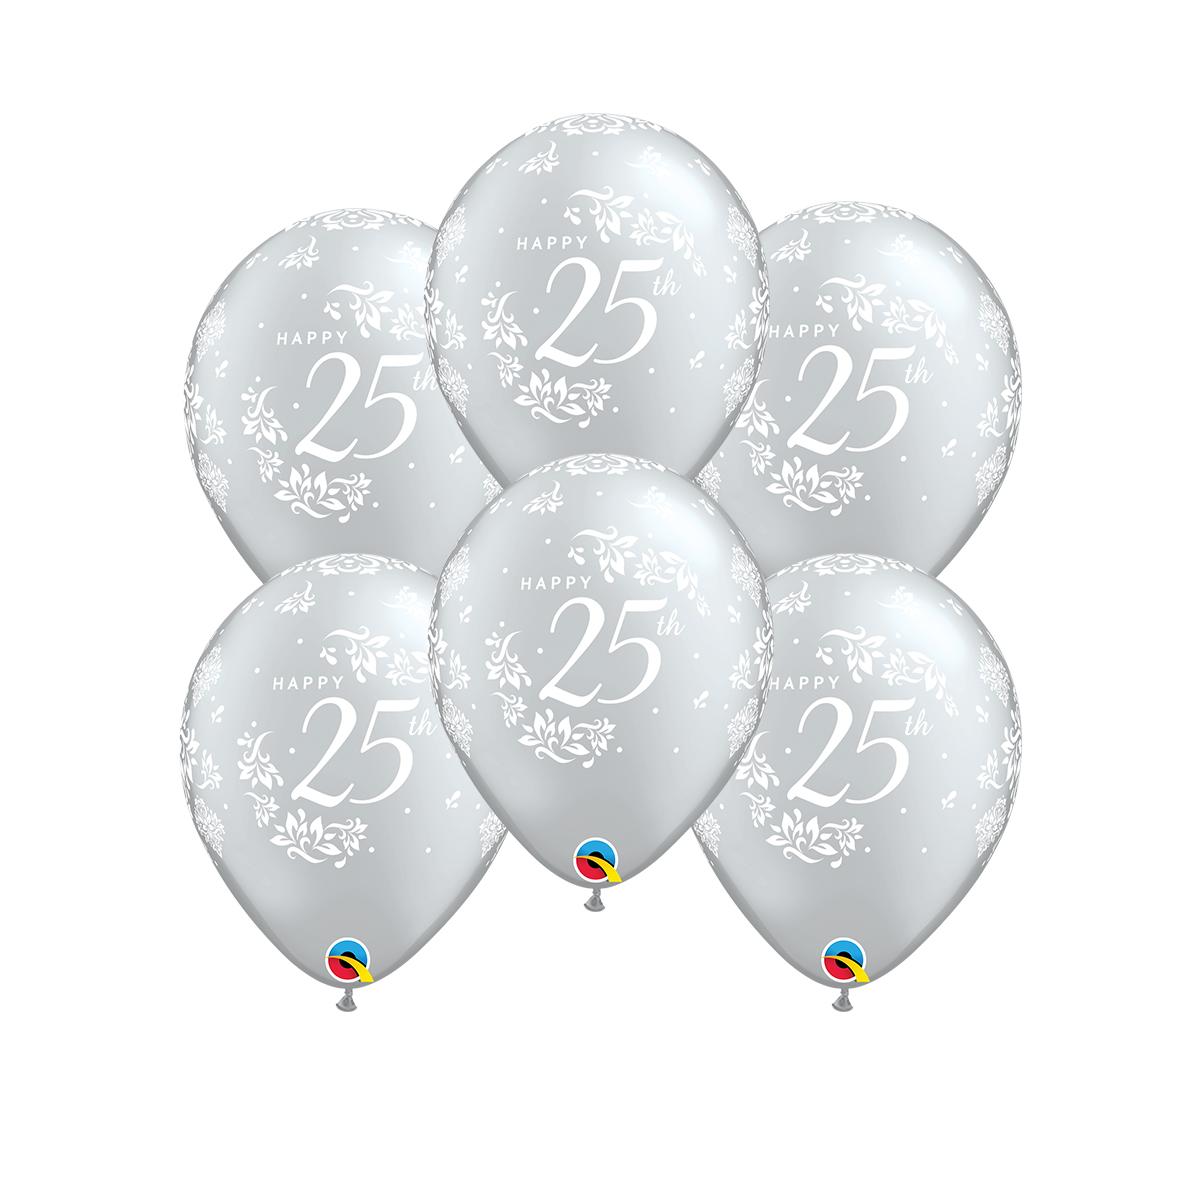 6 Inflated Silver Anniversary Latex Balloons